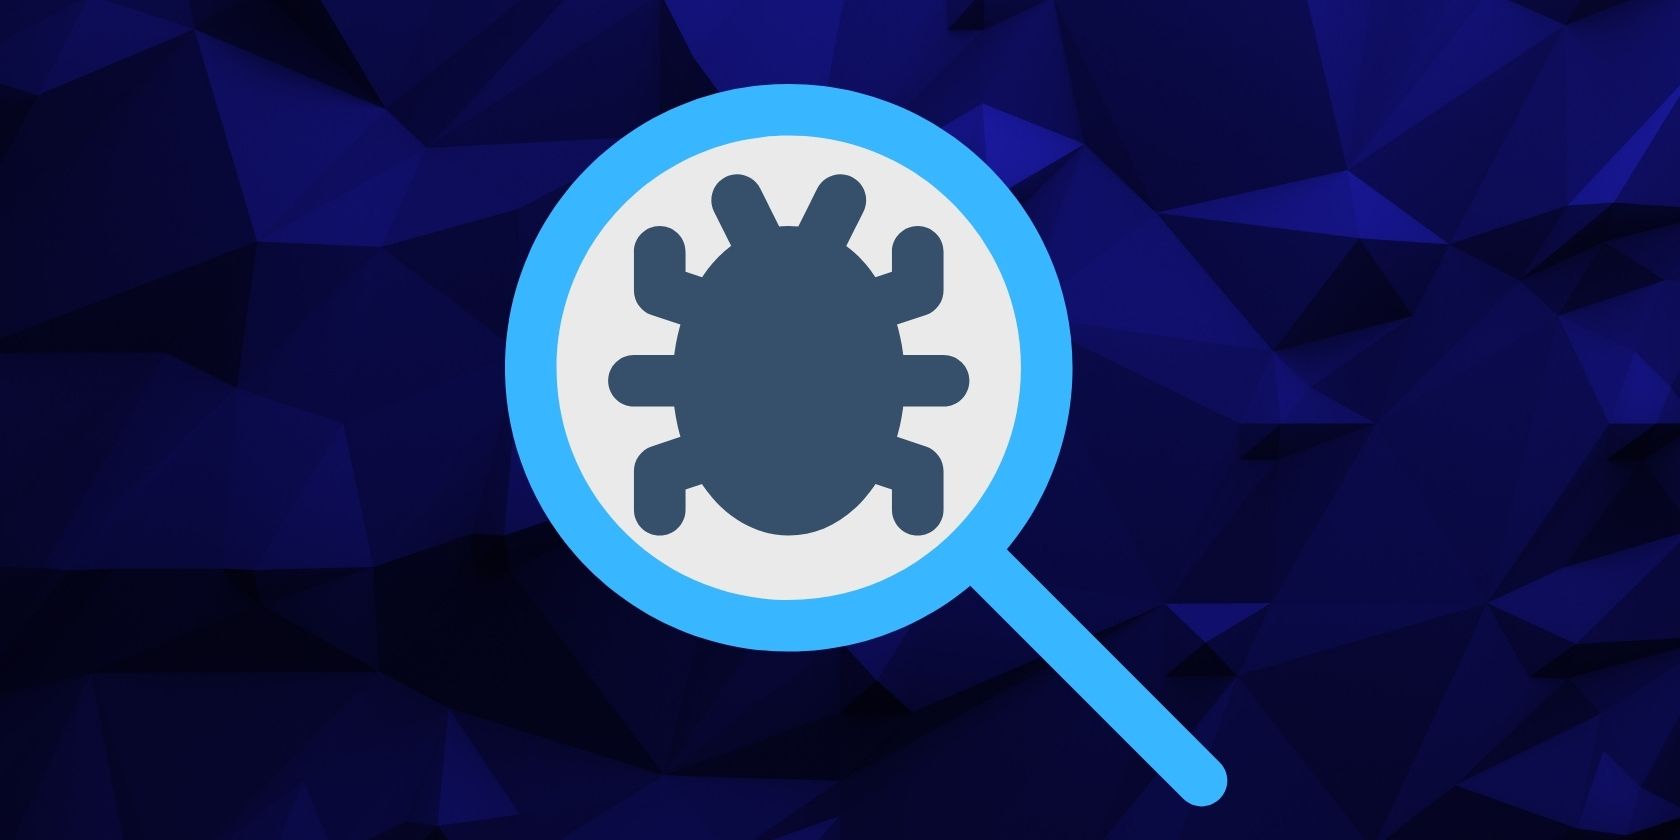 An icon of a bug enlarged by a magnifying glass